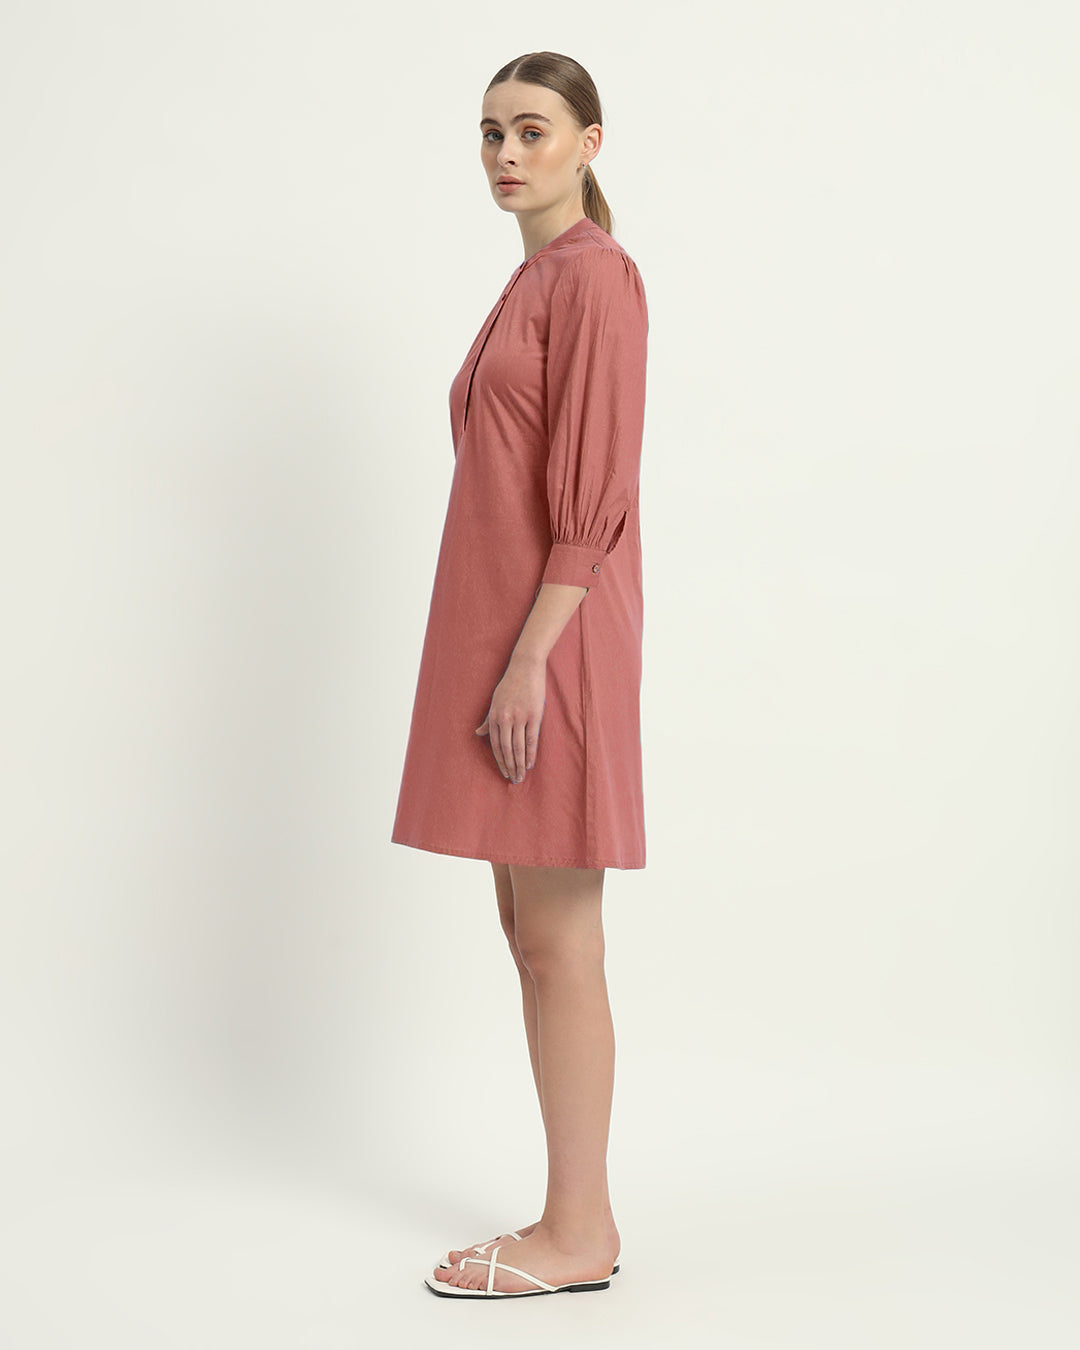 The Roslyn  Ivory Pink Cotton Dress